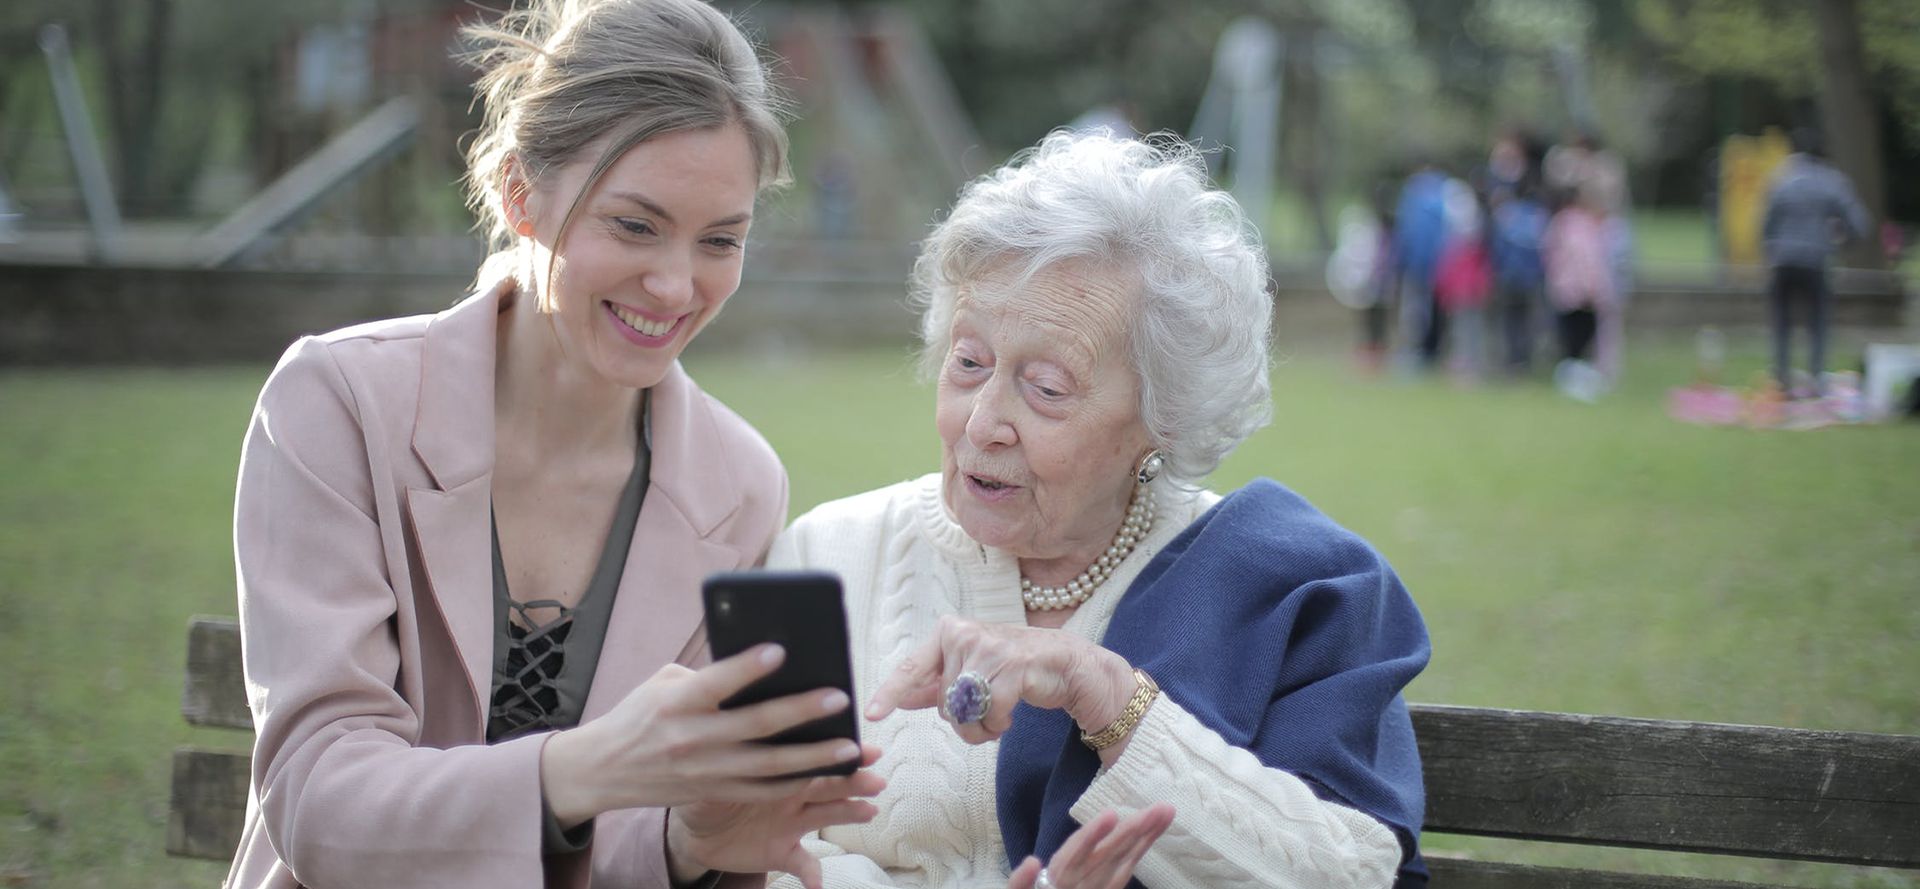 Dating sites for young people and seniors.